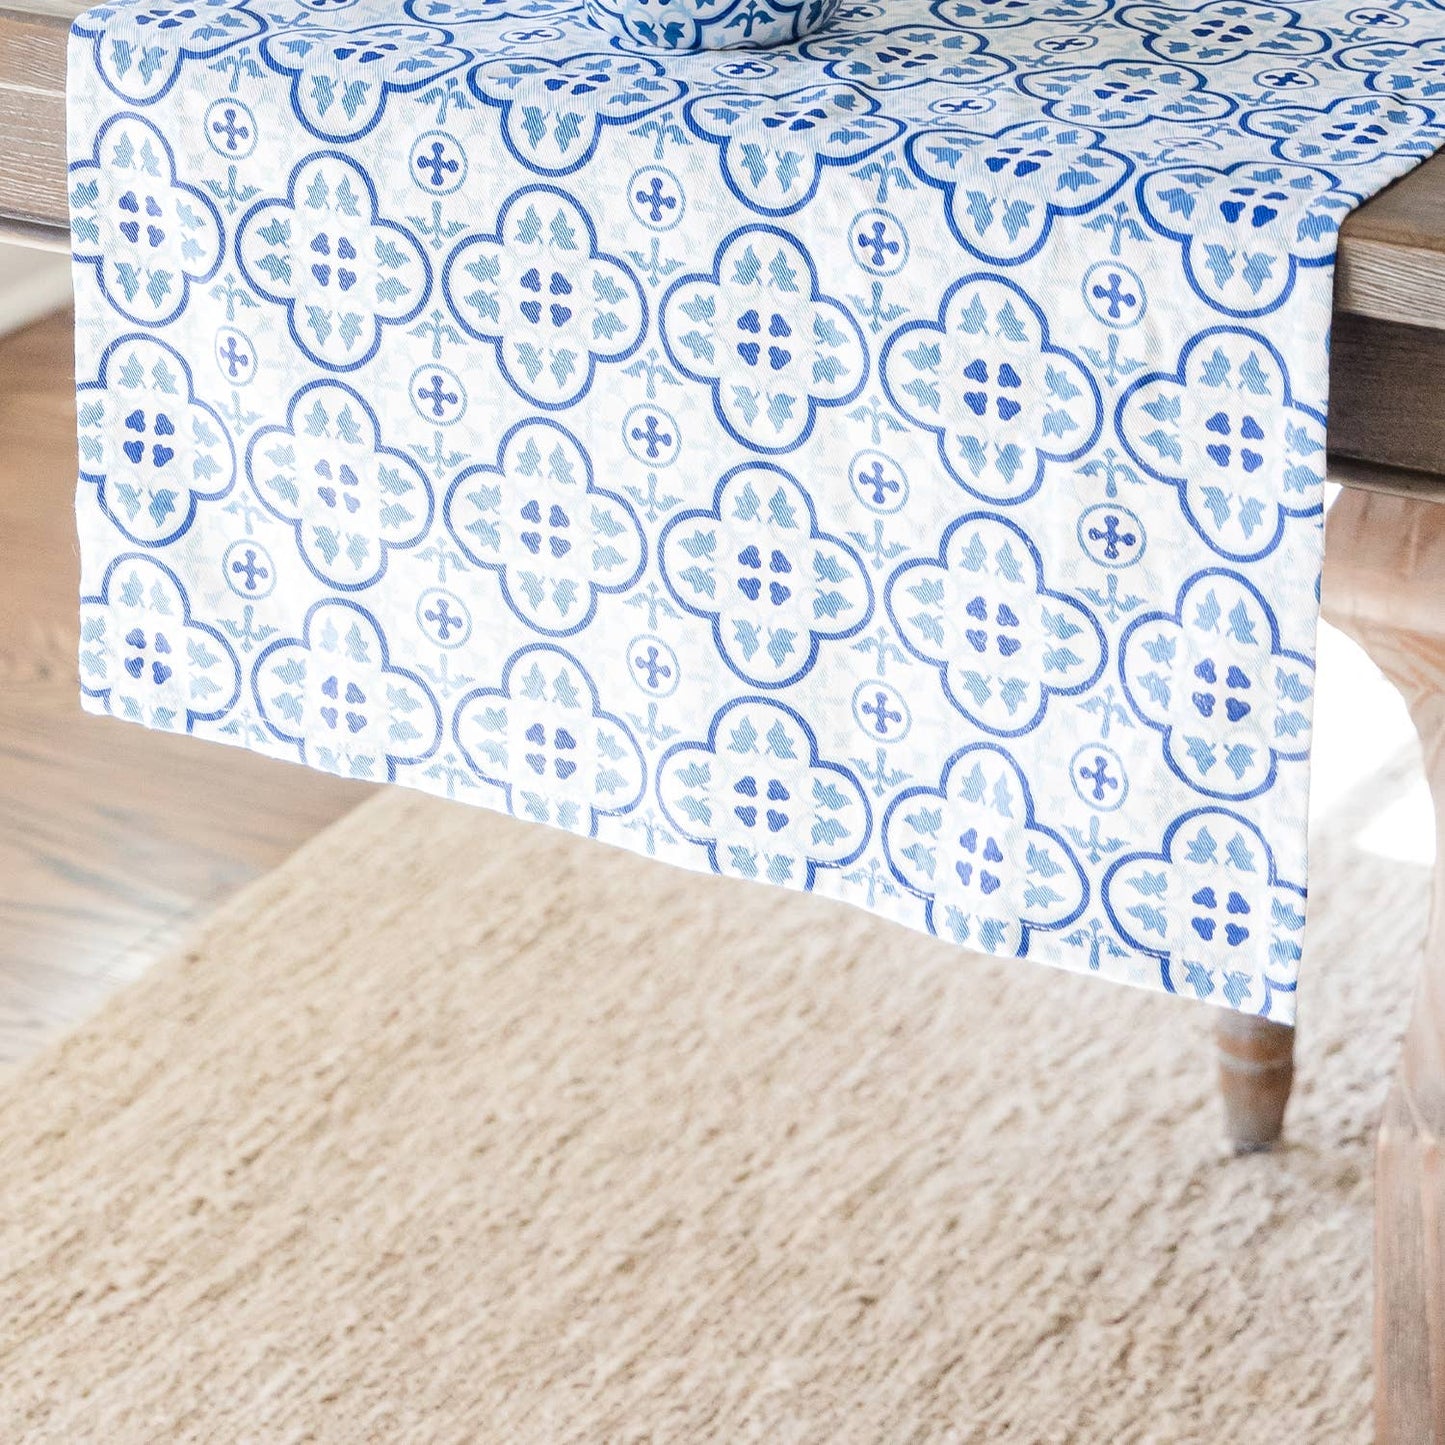 Moroccan Table Runner in Blue White Colors | Geometric Tile Pattern Cotton Mat